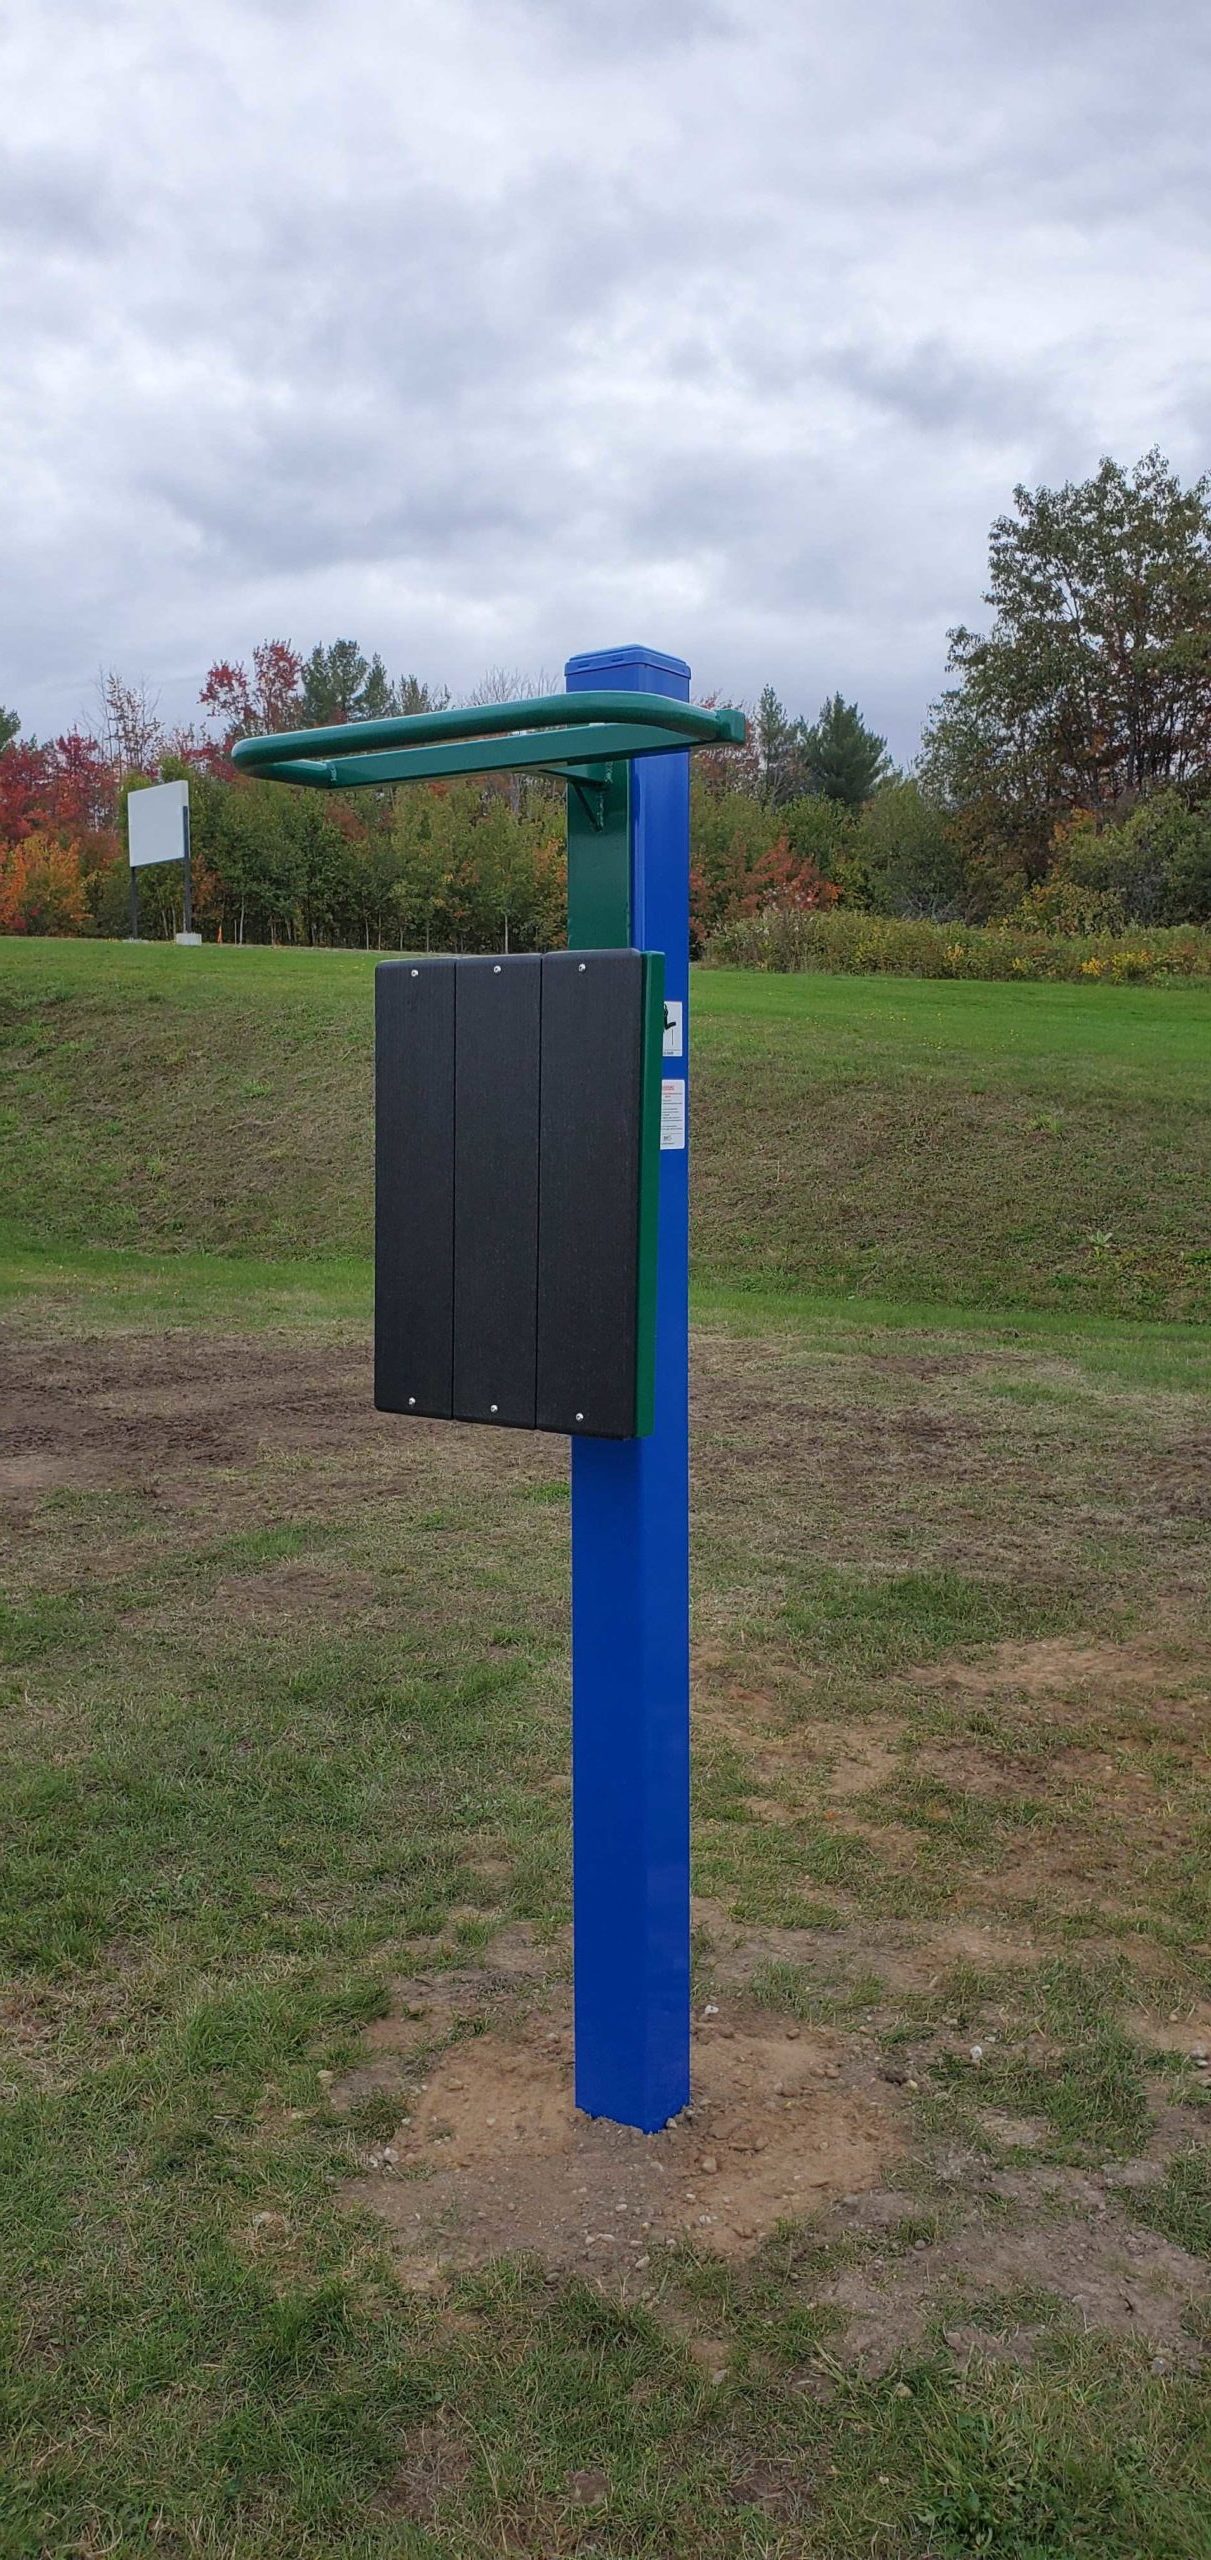 StayFit systems installation at Canadian Armed Forces Base 35